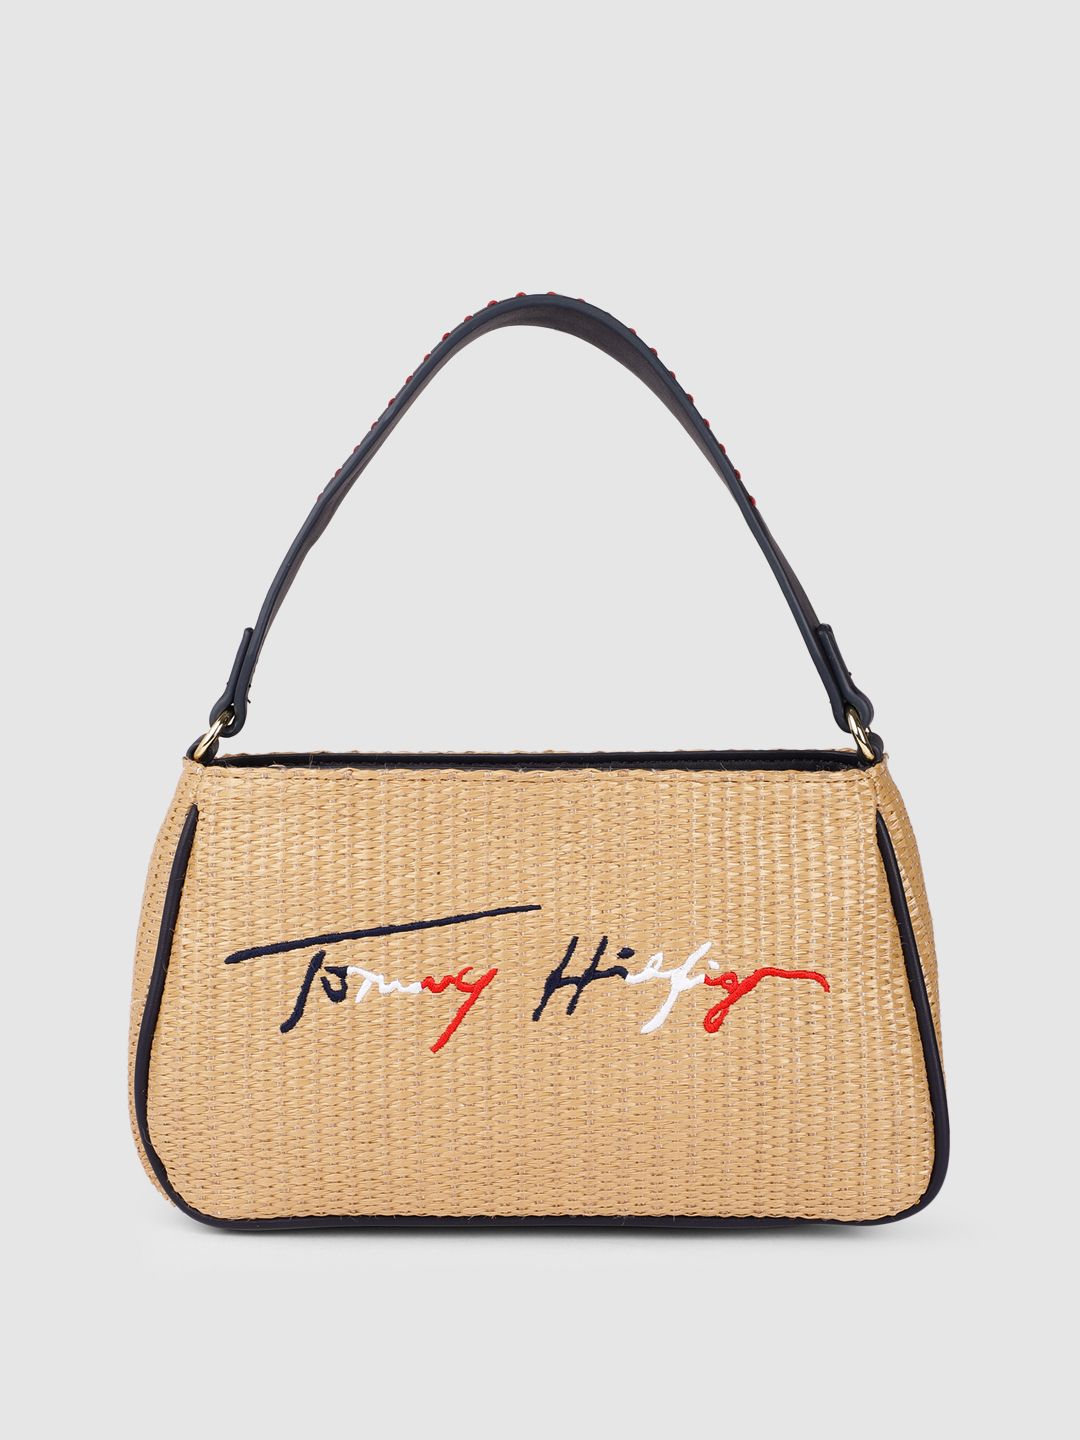 Tommy Hilfiger Beige Woven Design Brand Logo Embroidered Structured Handheld Bag Price in India